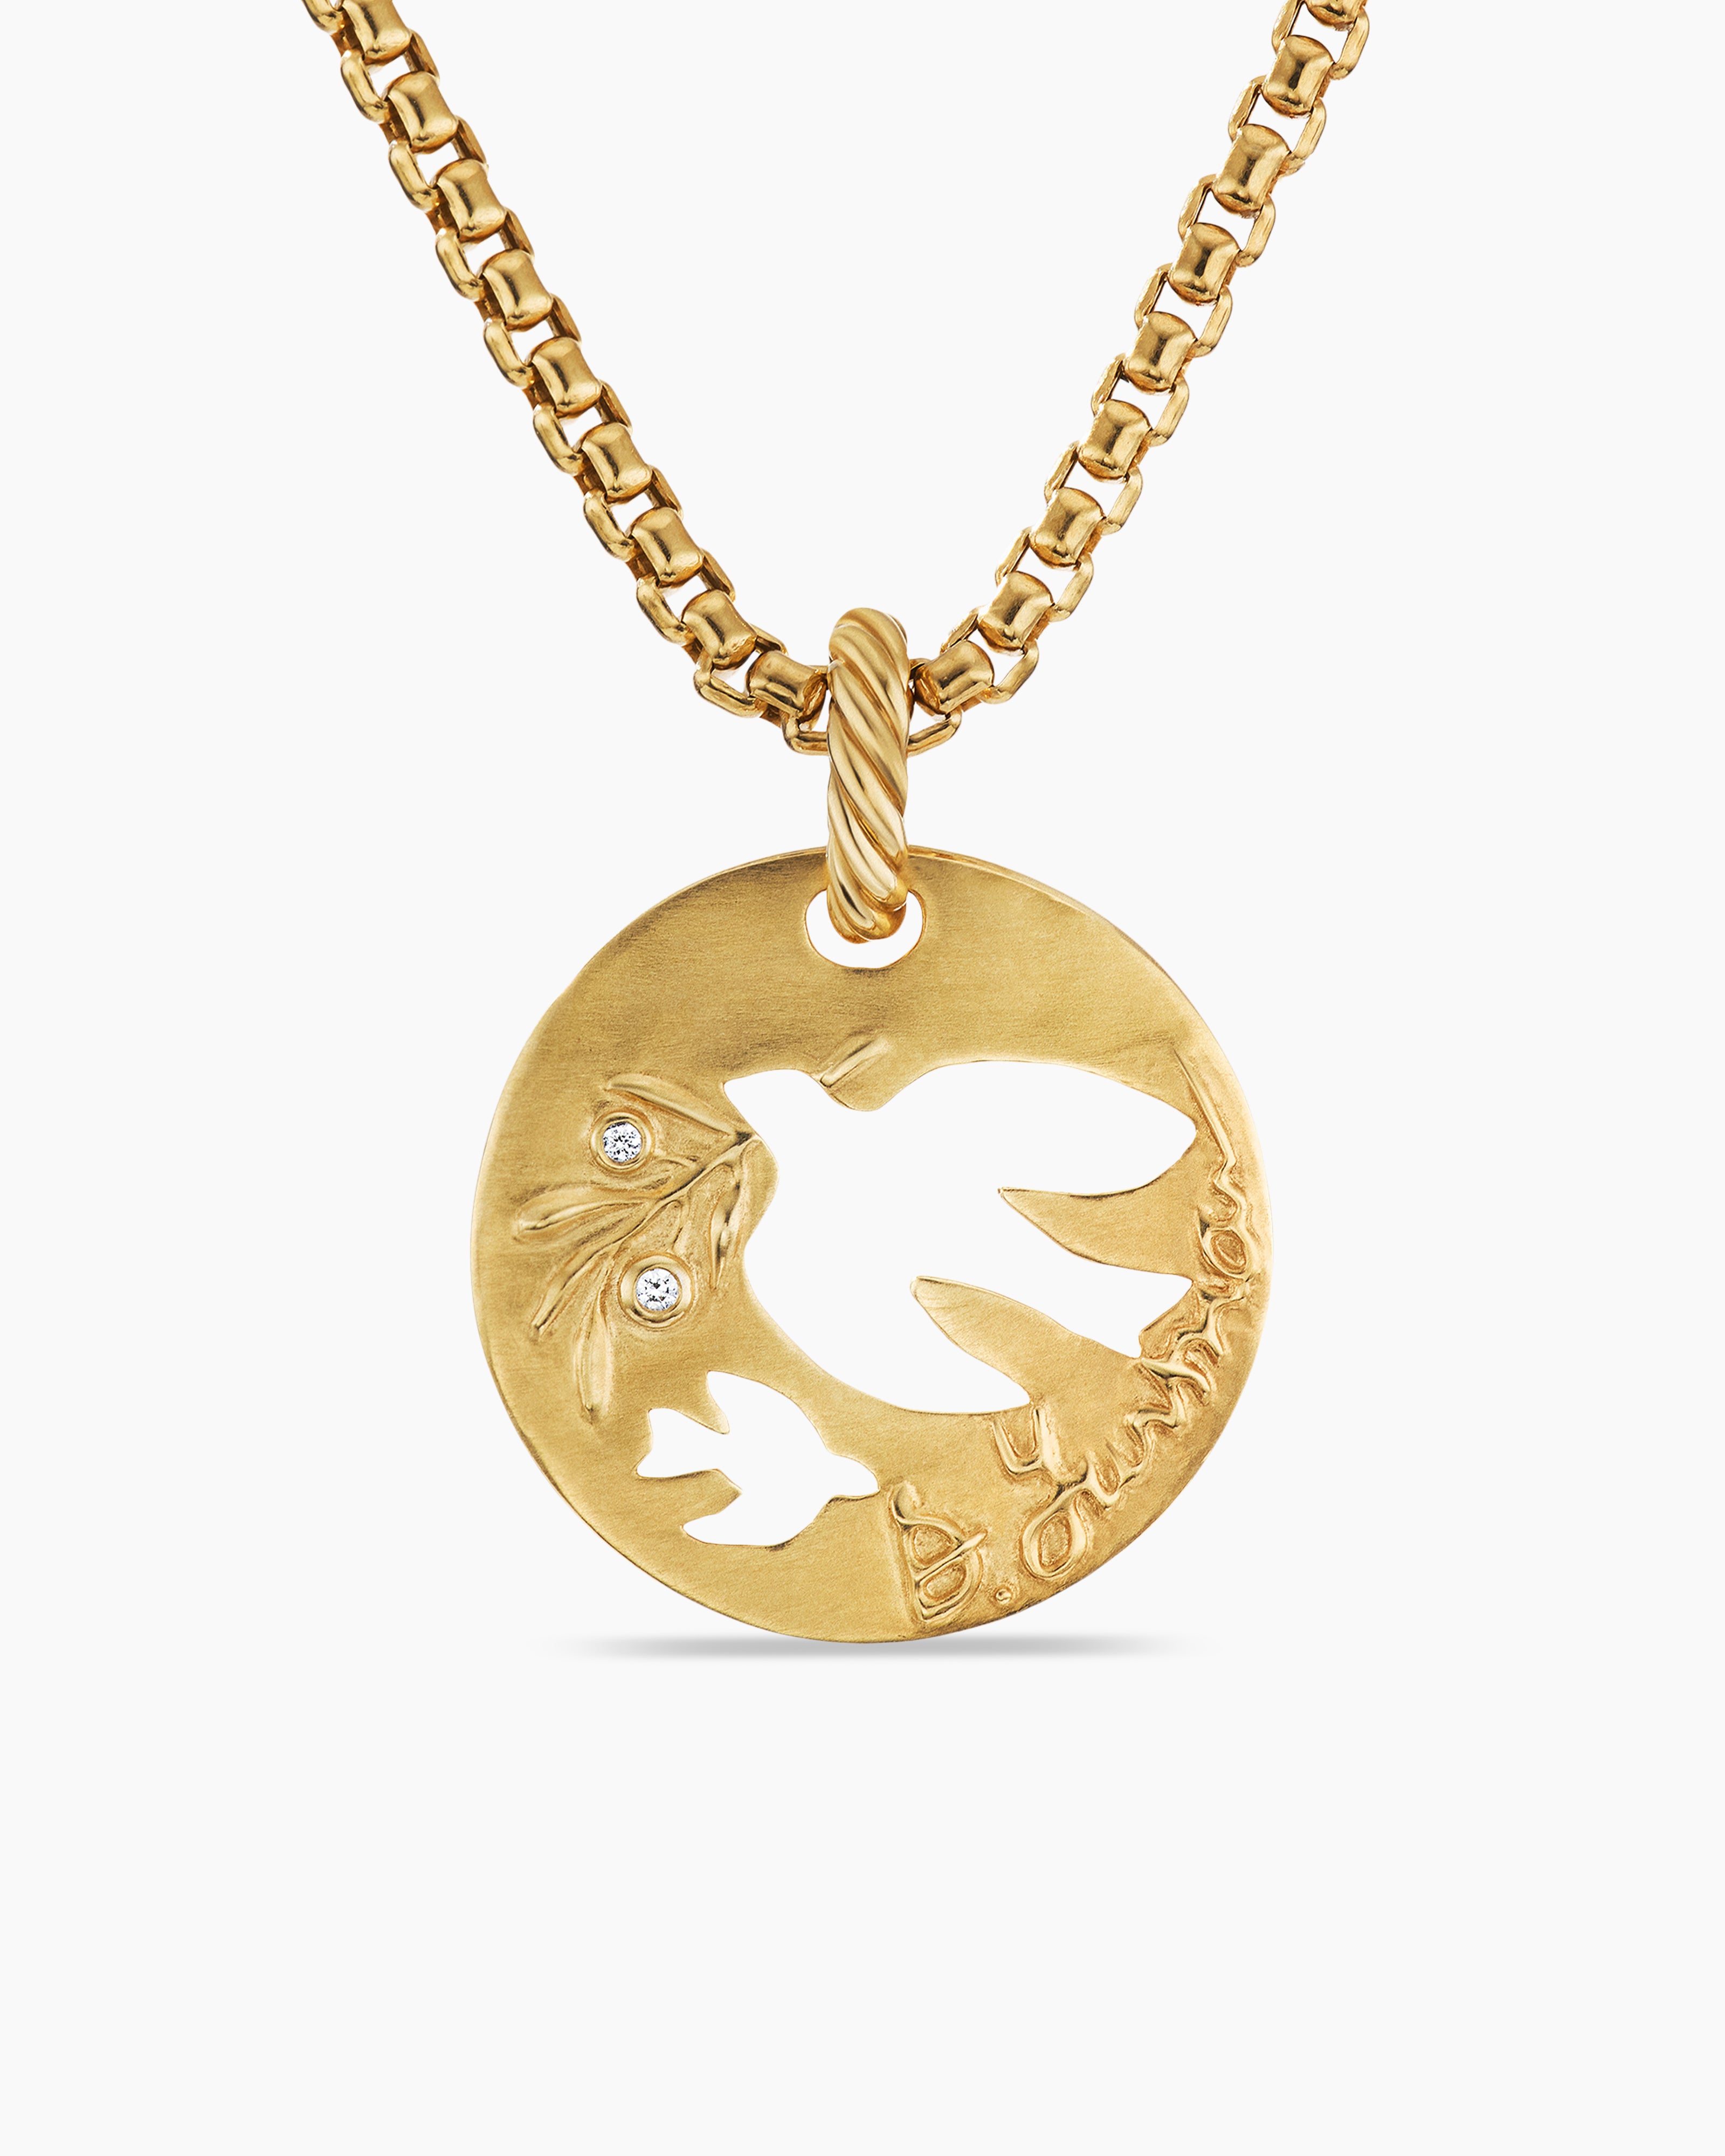 DY Elements® Dove Pendant in 18K Yellow Gold with Diamonds, 21.7mm